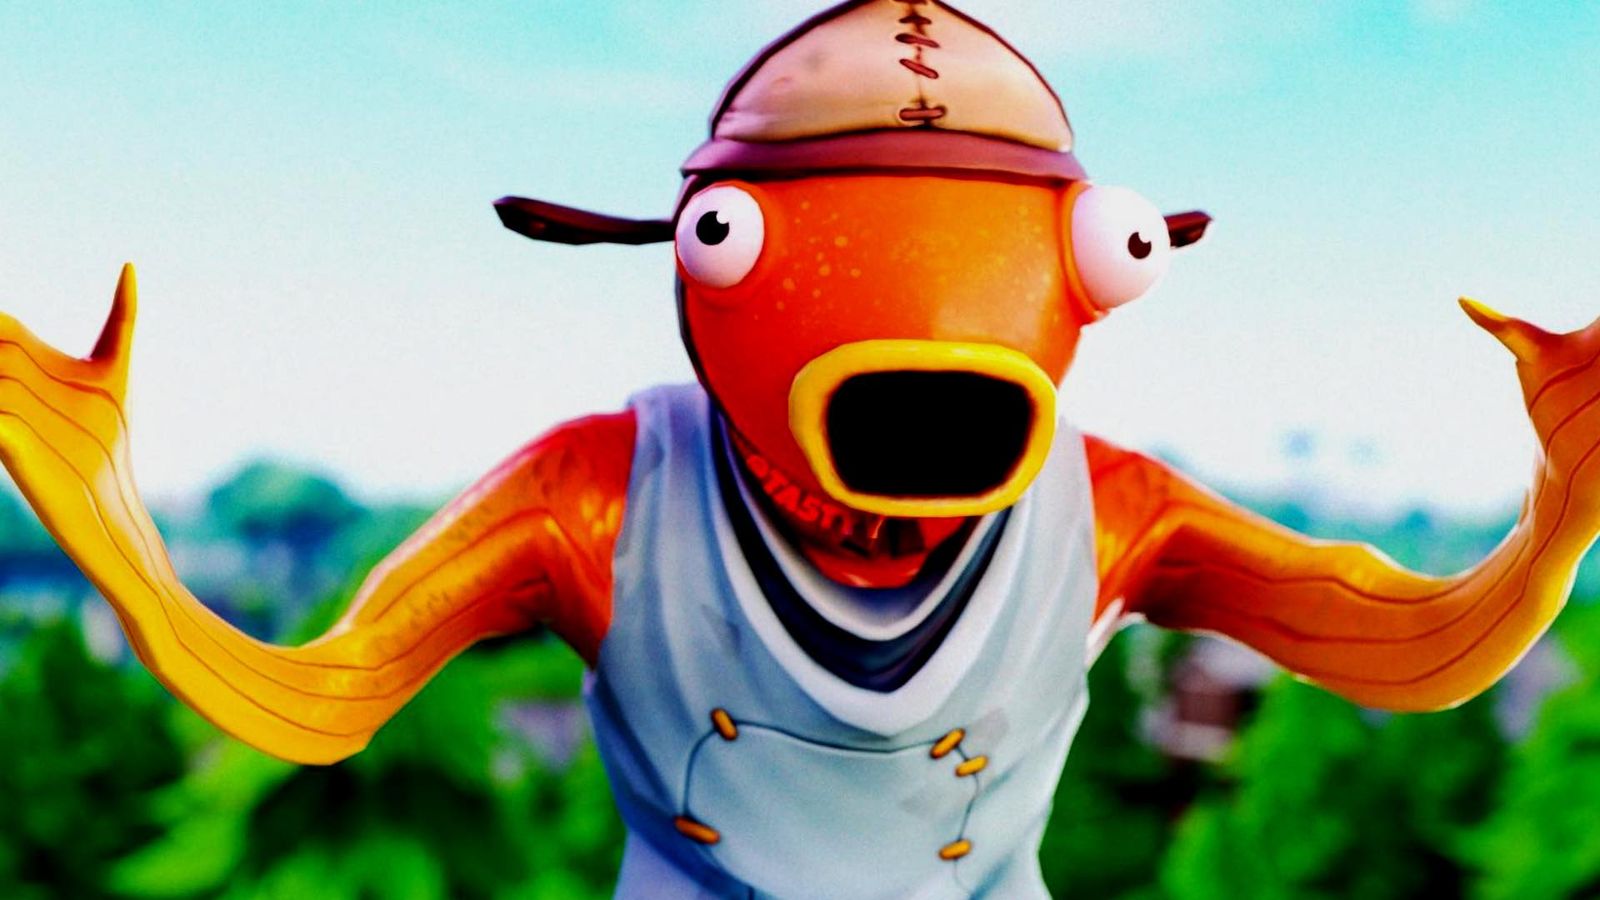 A Fortnite Fish Man acting shocked, surprised and angry 